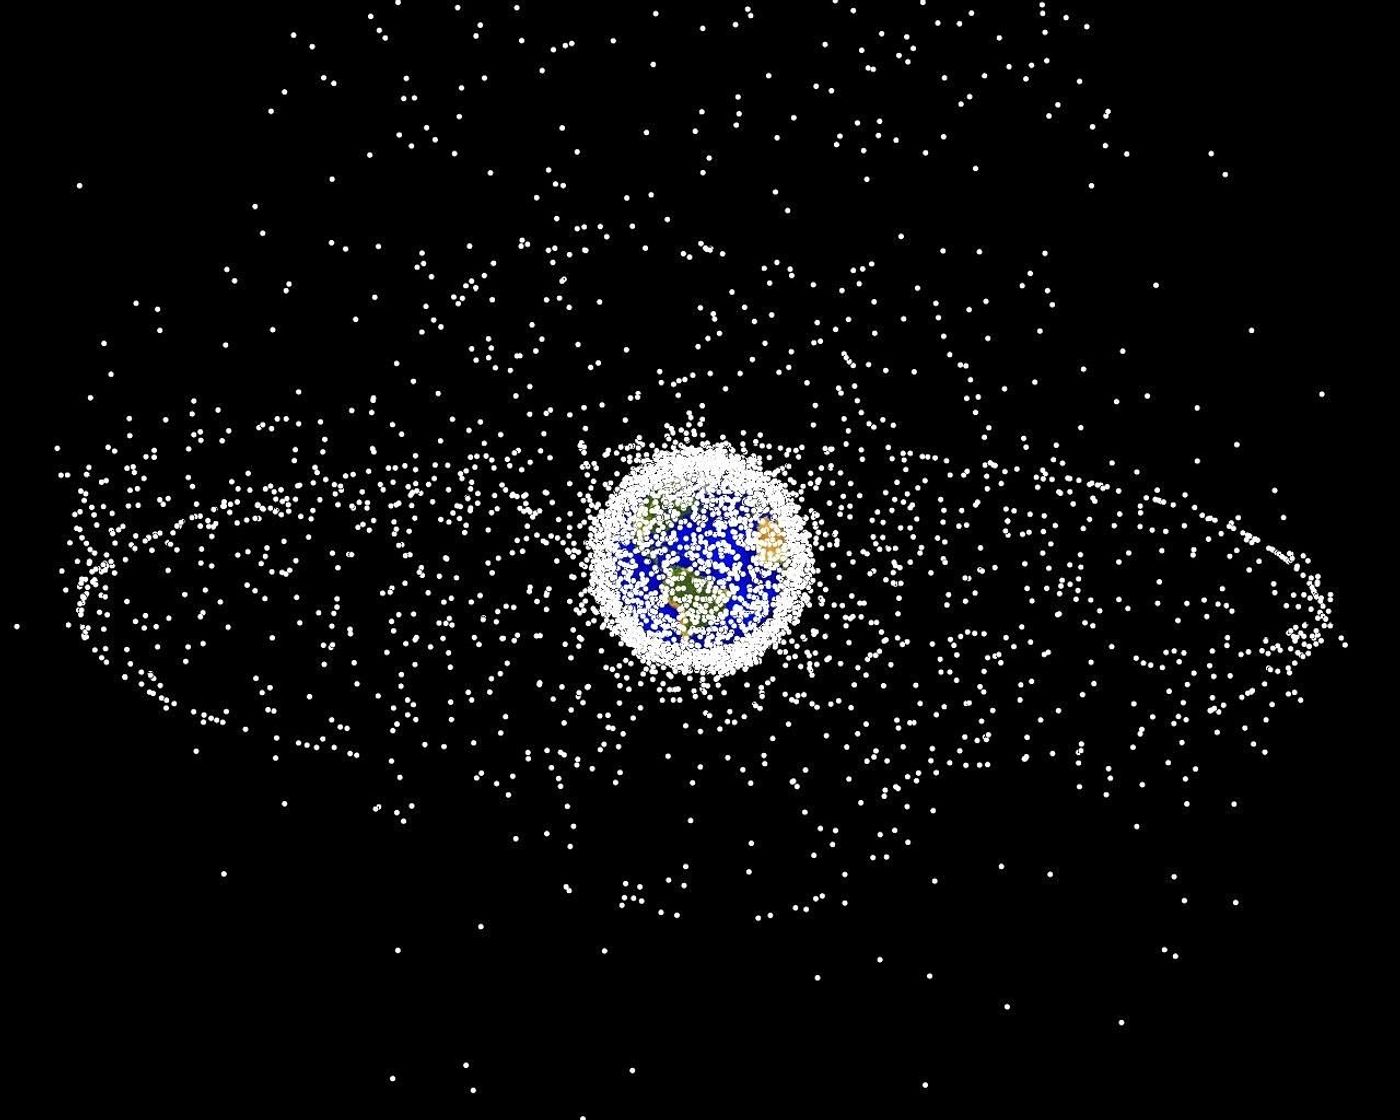 Space junk is a problem. This illustration shows just how cluttered the space surrounding Earth actually is today.